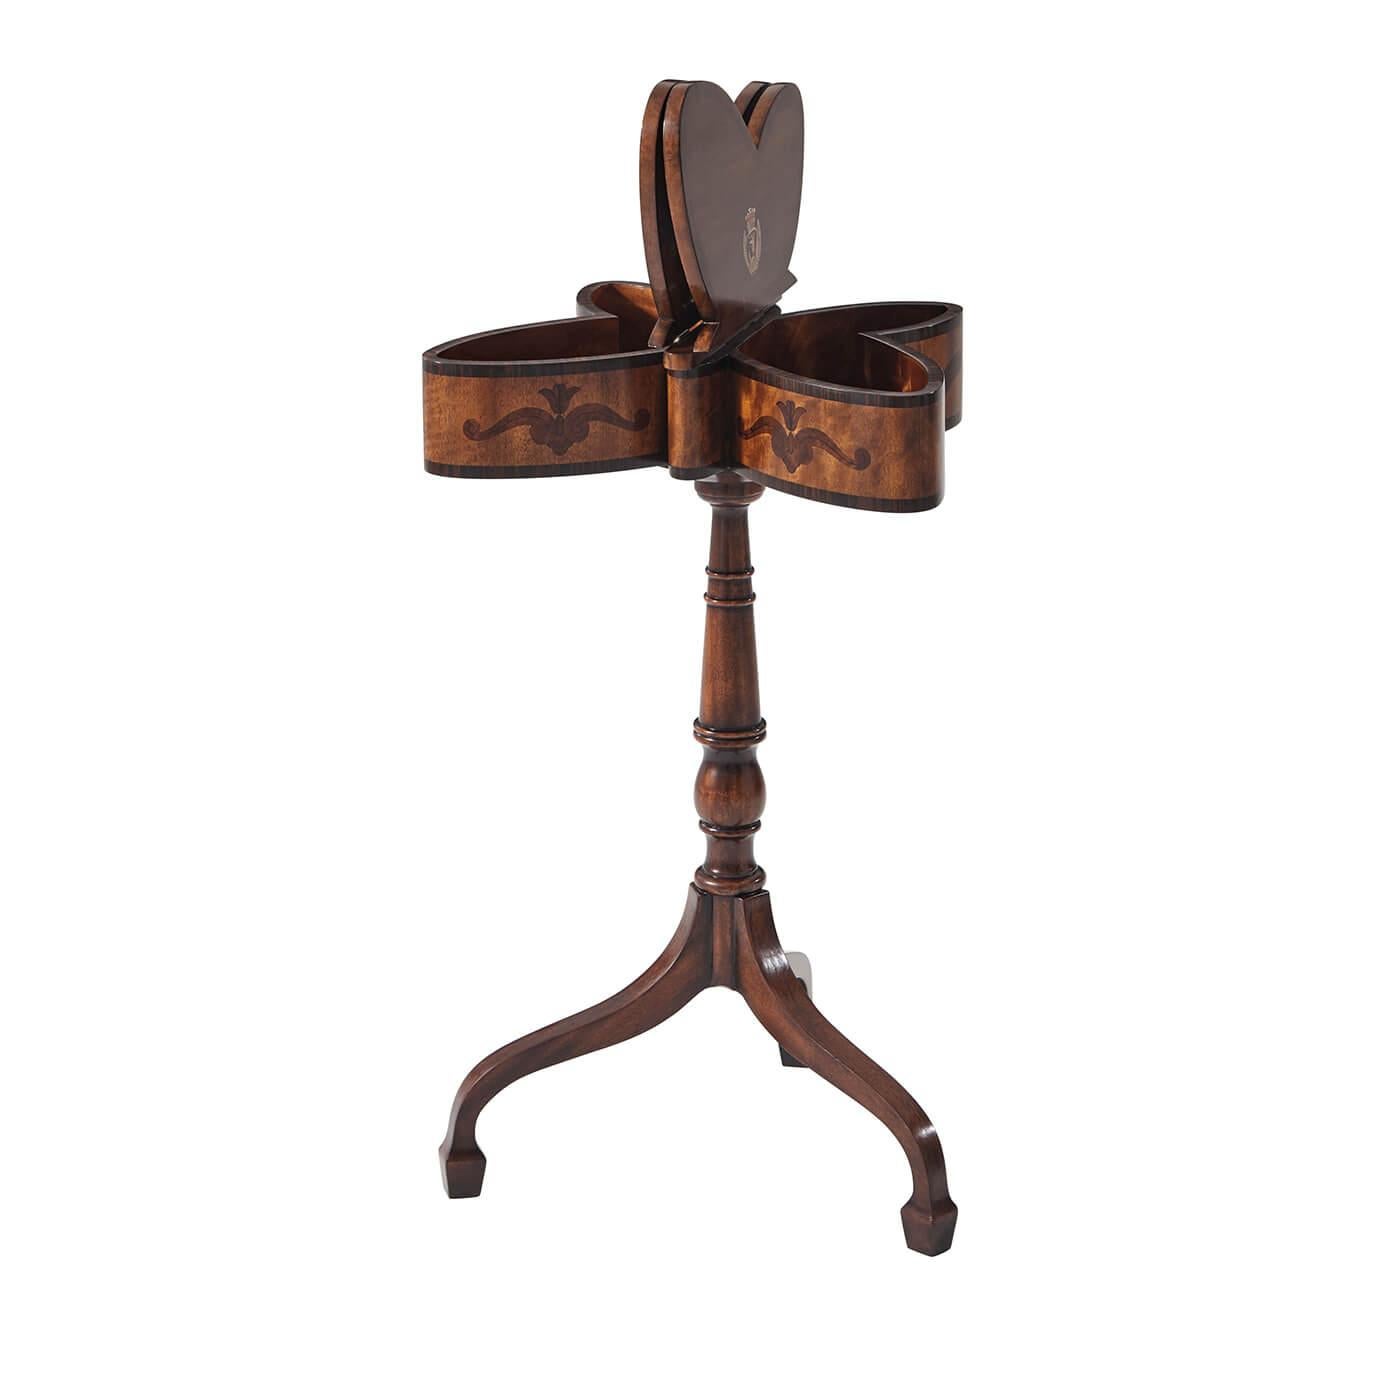 An English Regency style marquetry inlaid butterfly work table, the top inlaid with rosewood, burl and amboyna and with two hinged wing panels opening to reveal the painted Spencer crest, on a ring and baluster turned column and delicate down swept